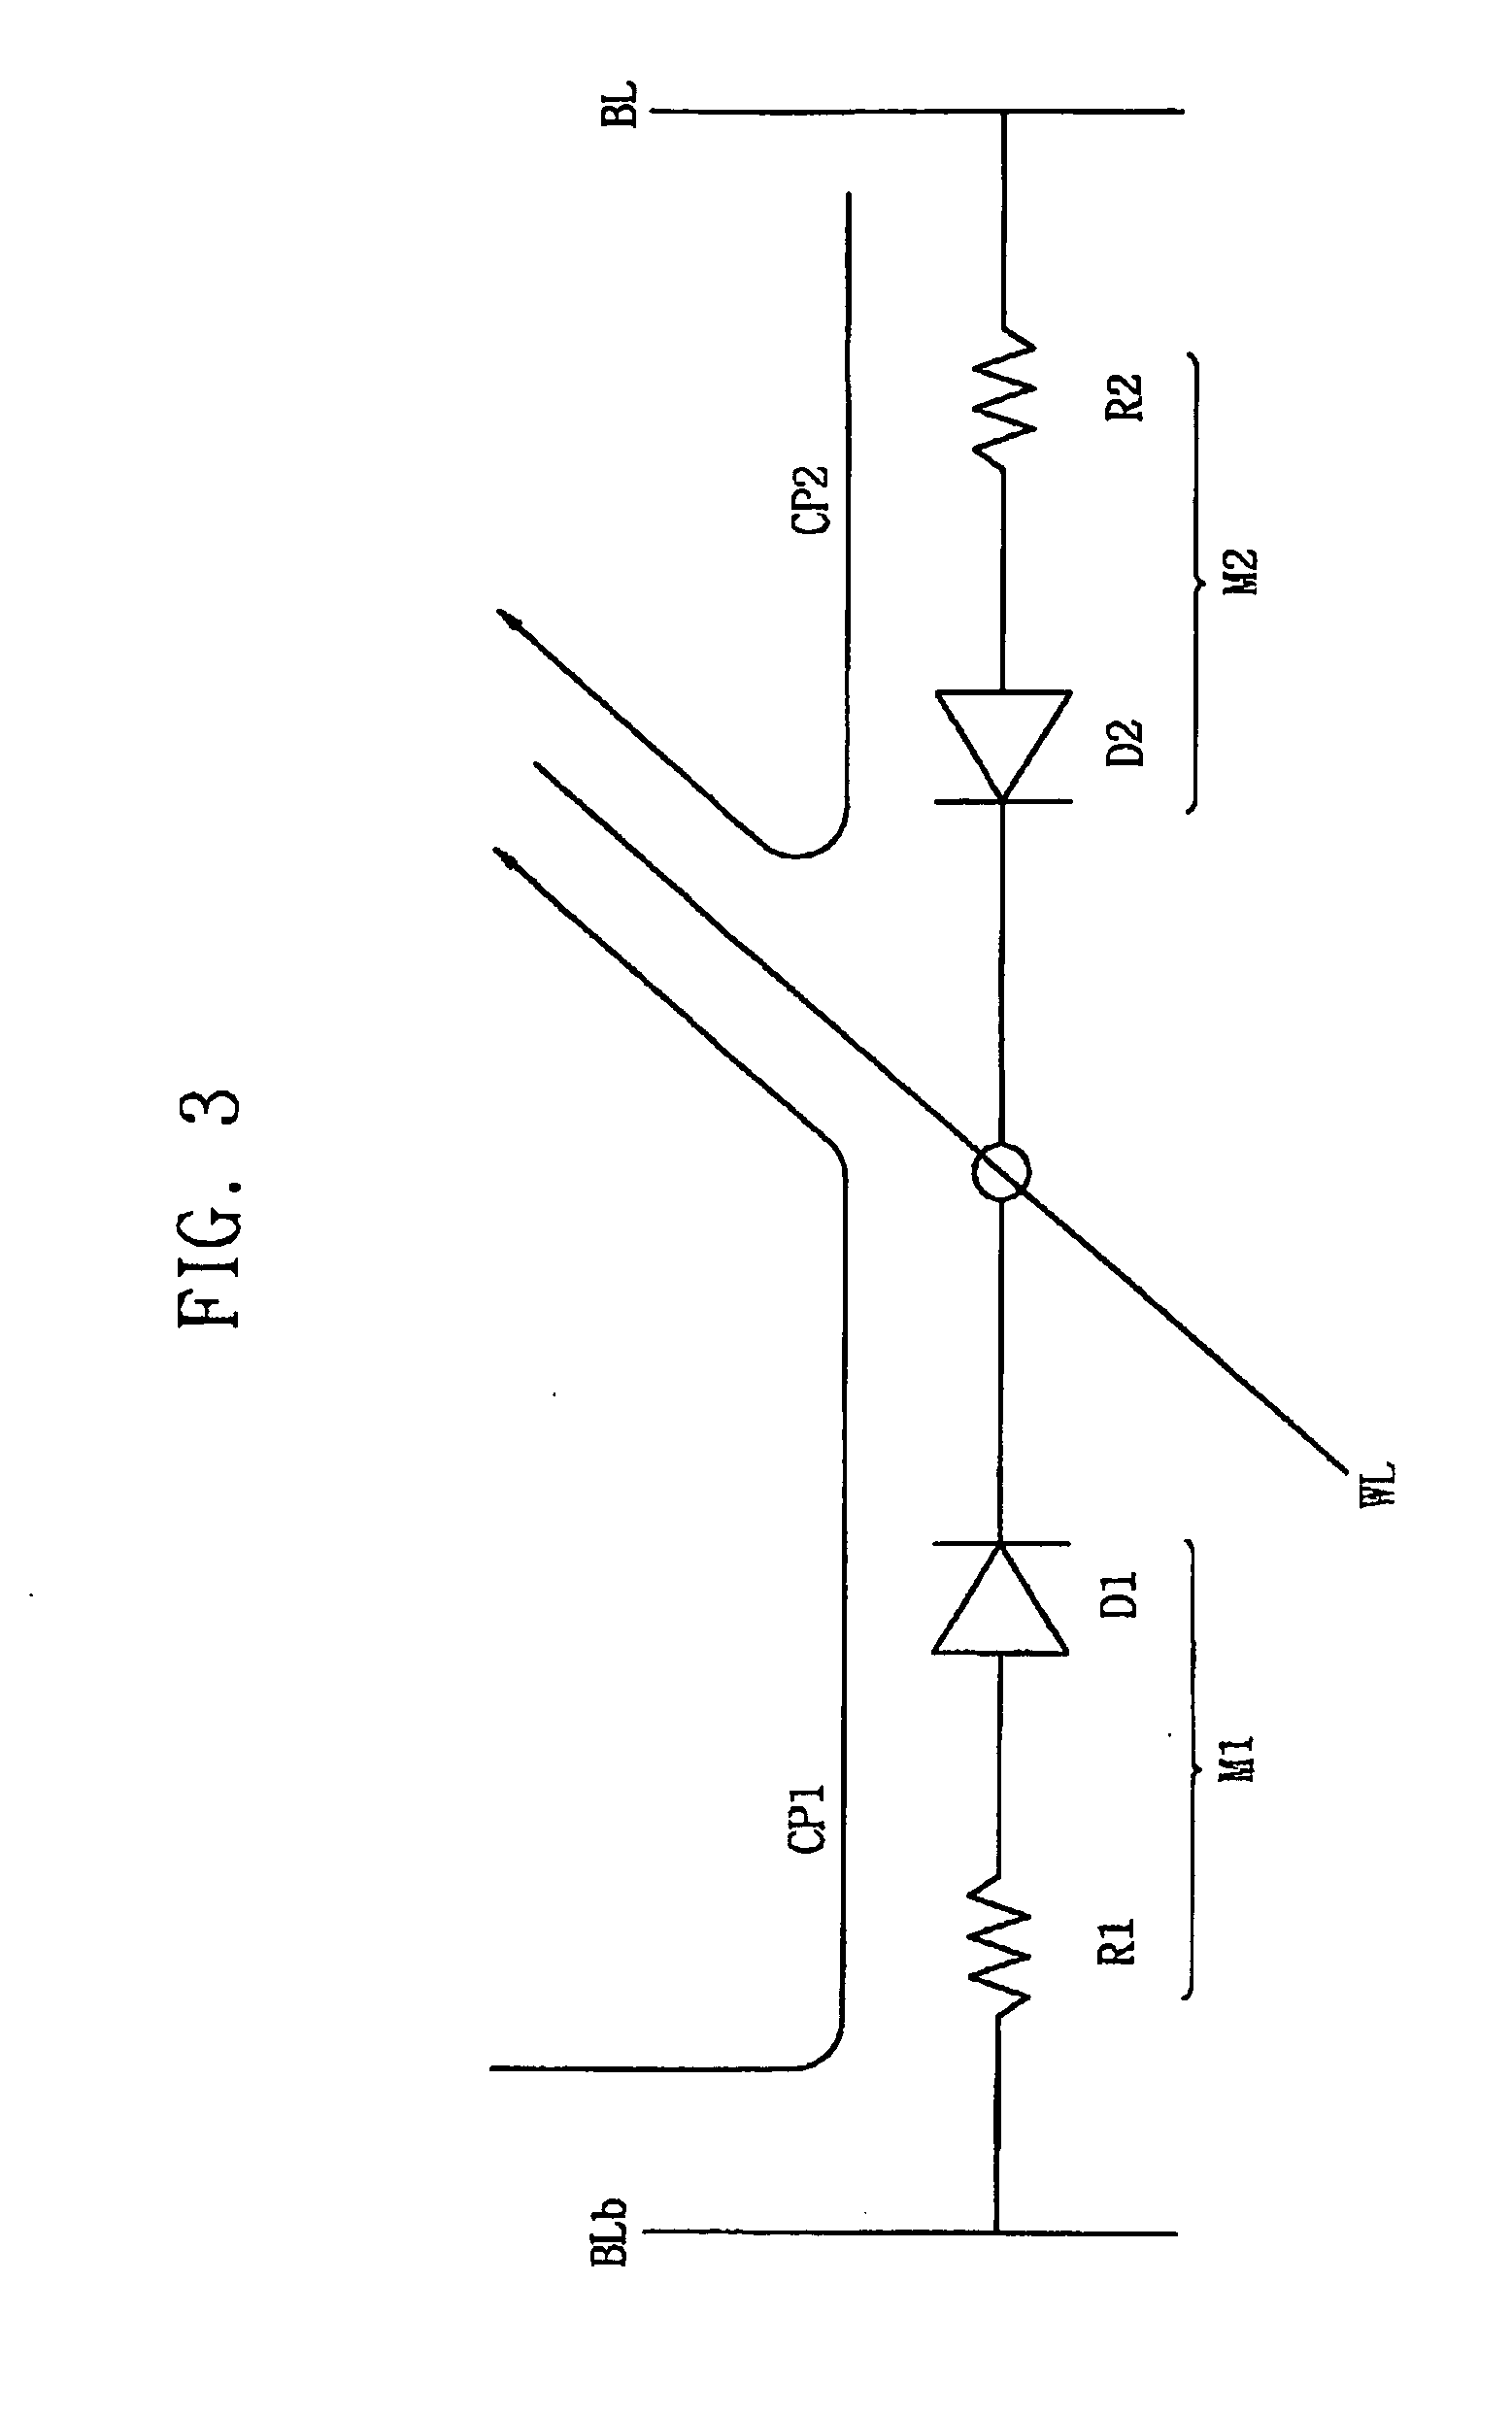 Memory cell of a resistive semiconductor memory device, a resistive semiconductor memory device having a three-dimensional stack structure, and related methods